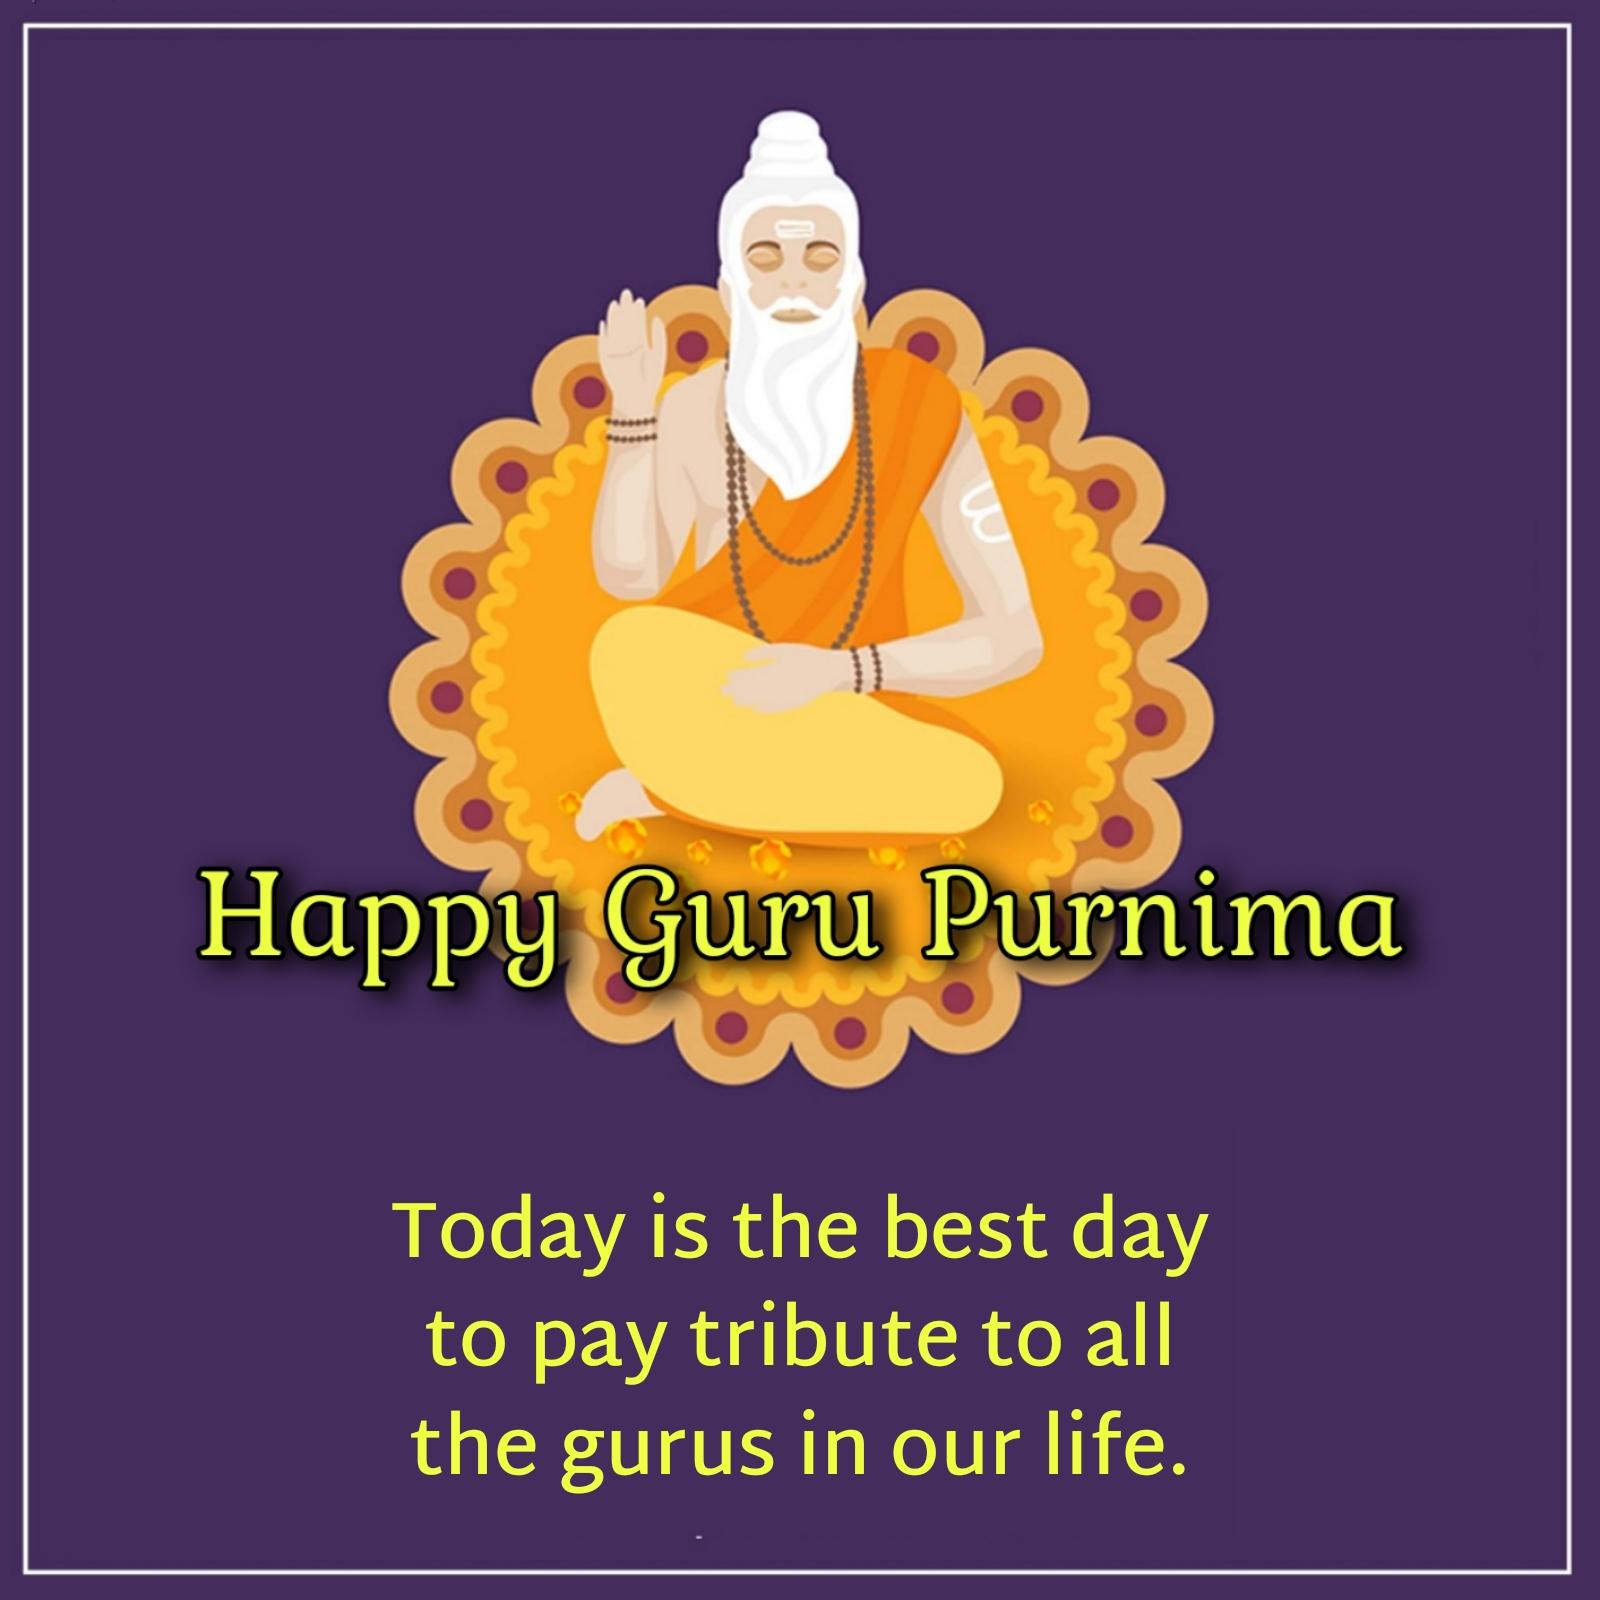 Today is the best day to pay tribute to all the gurus in our life